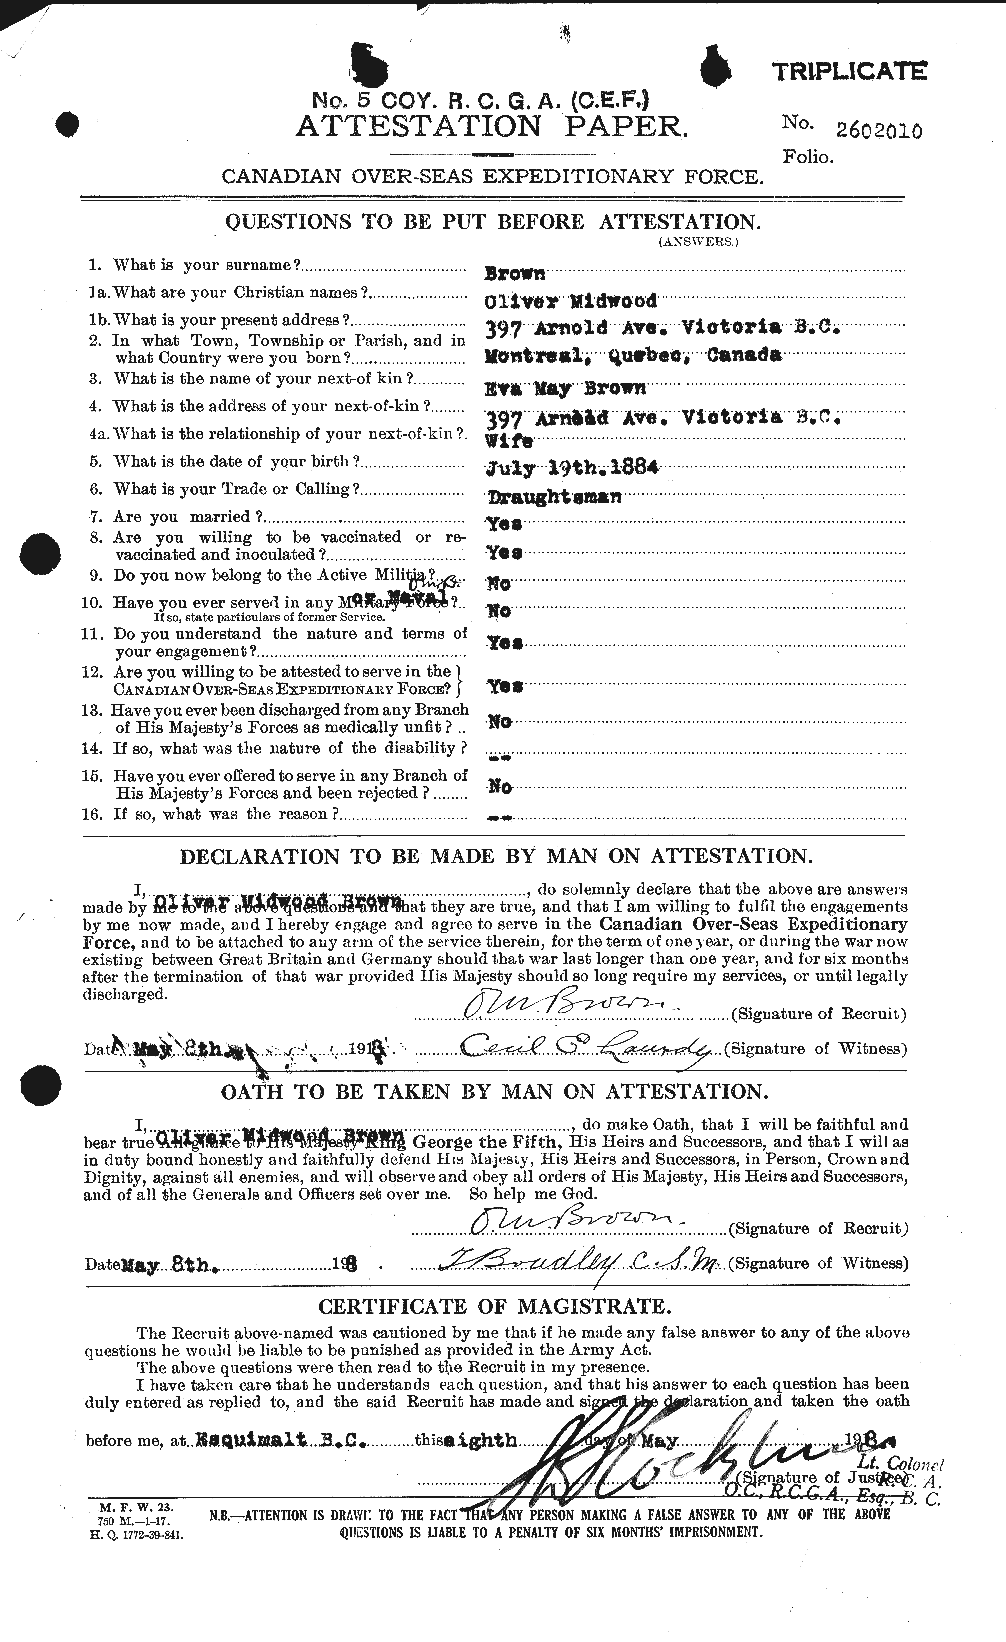 Personnel Records of the First World War - CEF 267128a